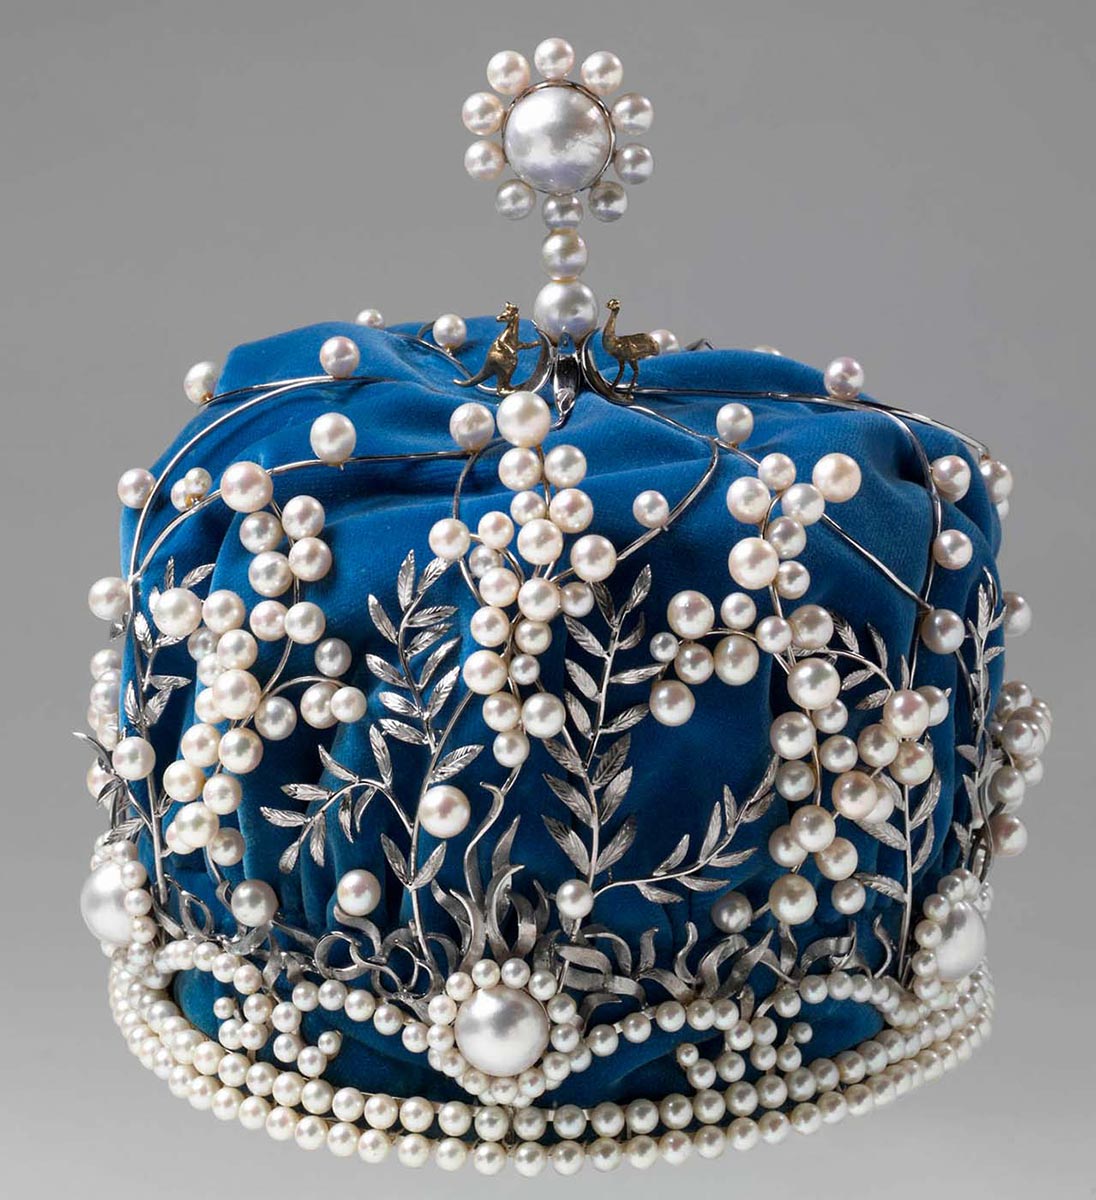 The Miss Australia crown, made with a silver-coloured metal in a wattle-leaf design, inset with cultured pearls. On the top of the crown are small gold-coloured figures of a kangaroo and an emu, standing either side of a upright centrepiece which features a large natural pearl. The crown is lined with blue velvet, which is, in turn lined with white netting.